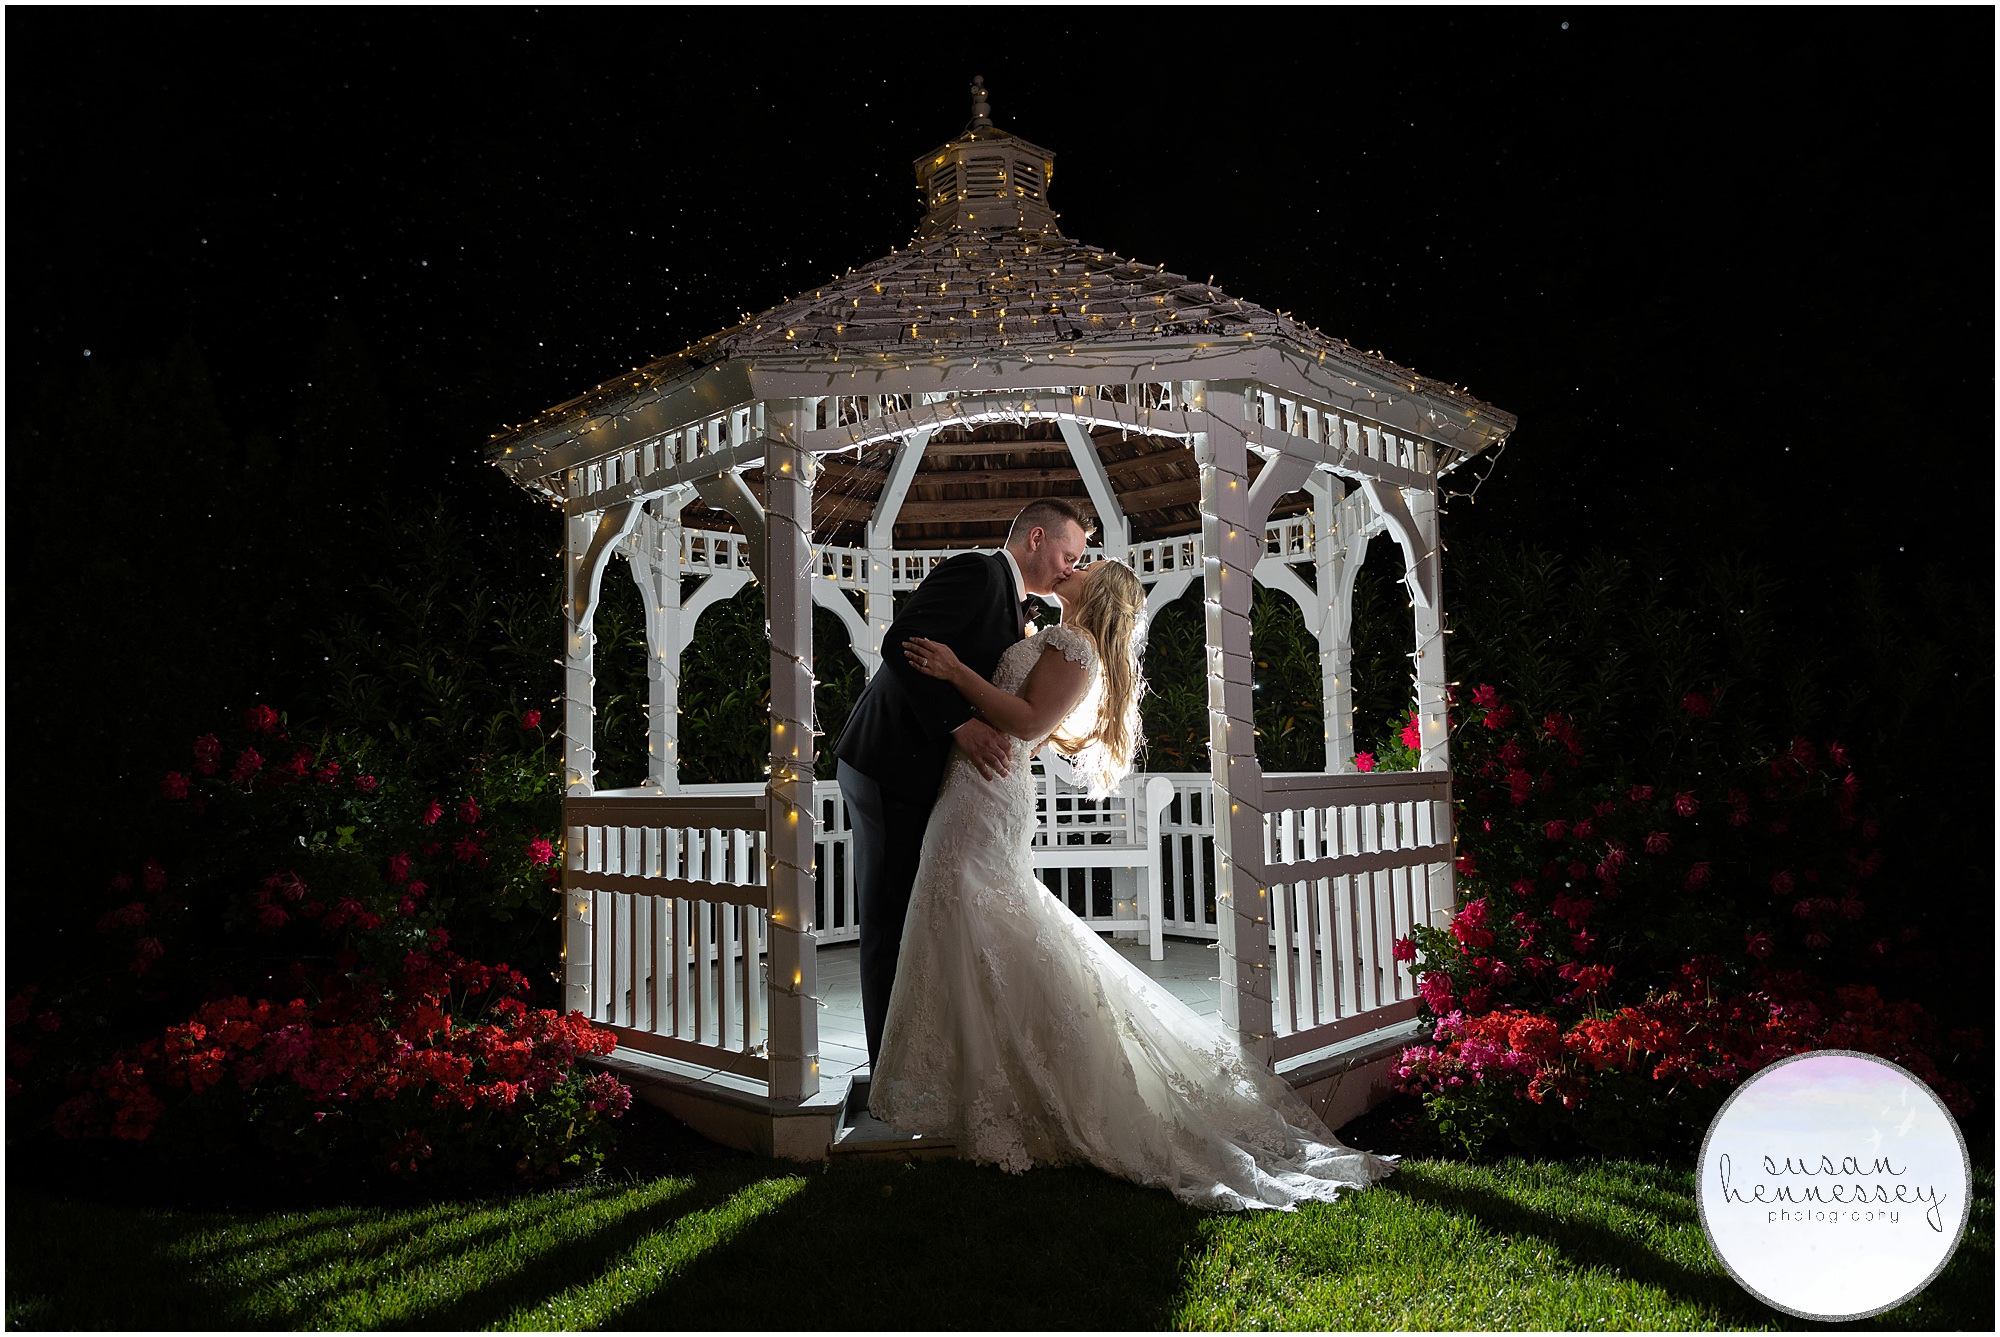 Wedding at The Bradford Estate ended with a romantic night shot in the rain